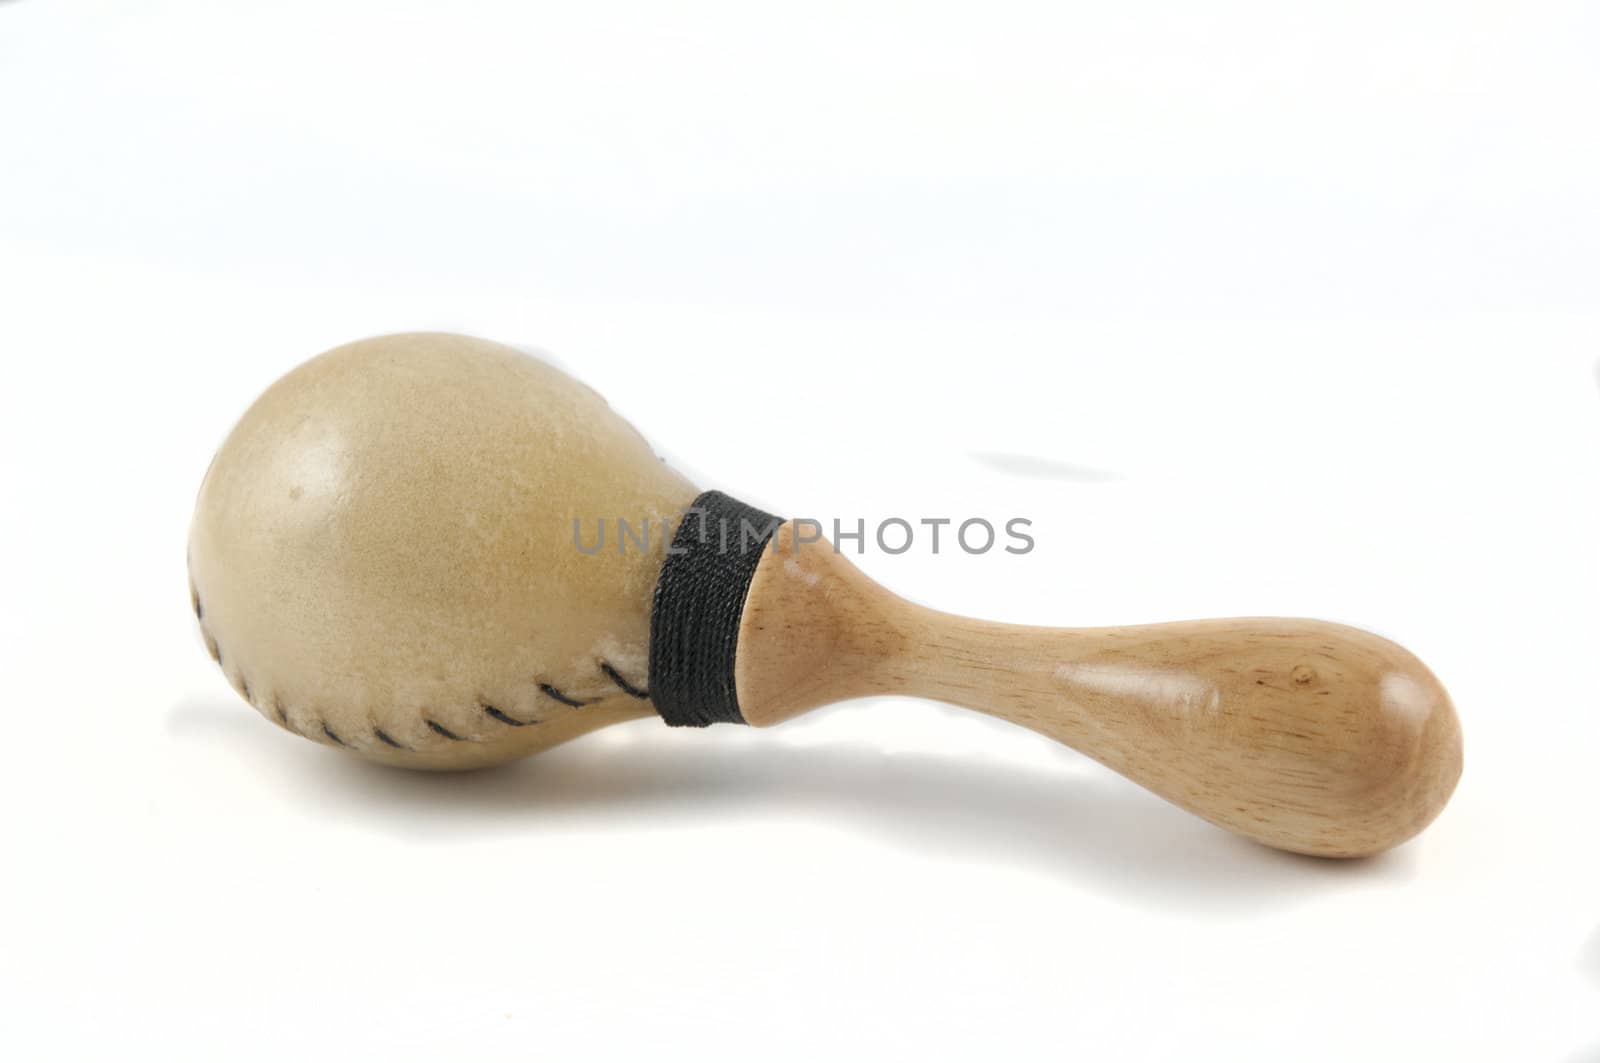 A wooden maraca isolated on white.